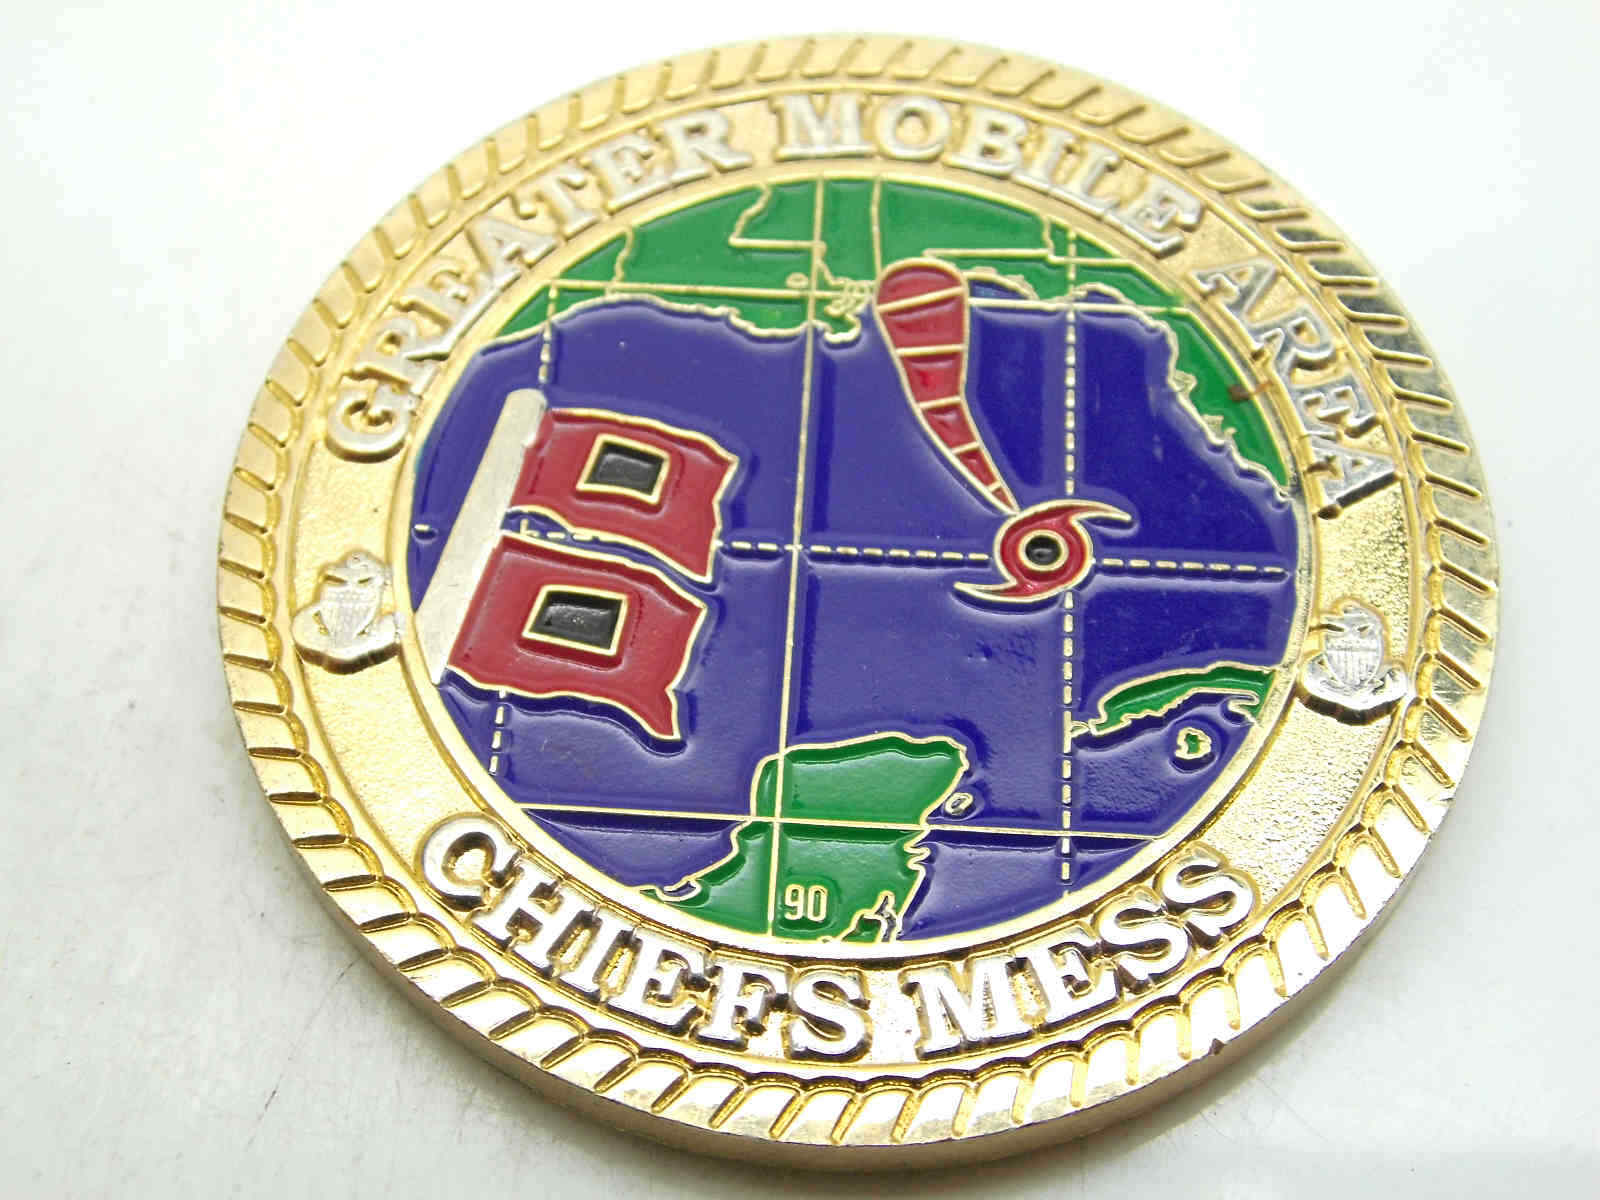 USN GREATER MOBILE AREA CHIEFS MESS STABILITY SECURITY CHALLENGE COIN